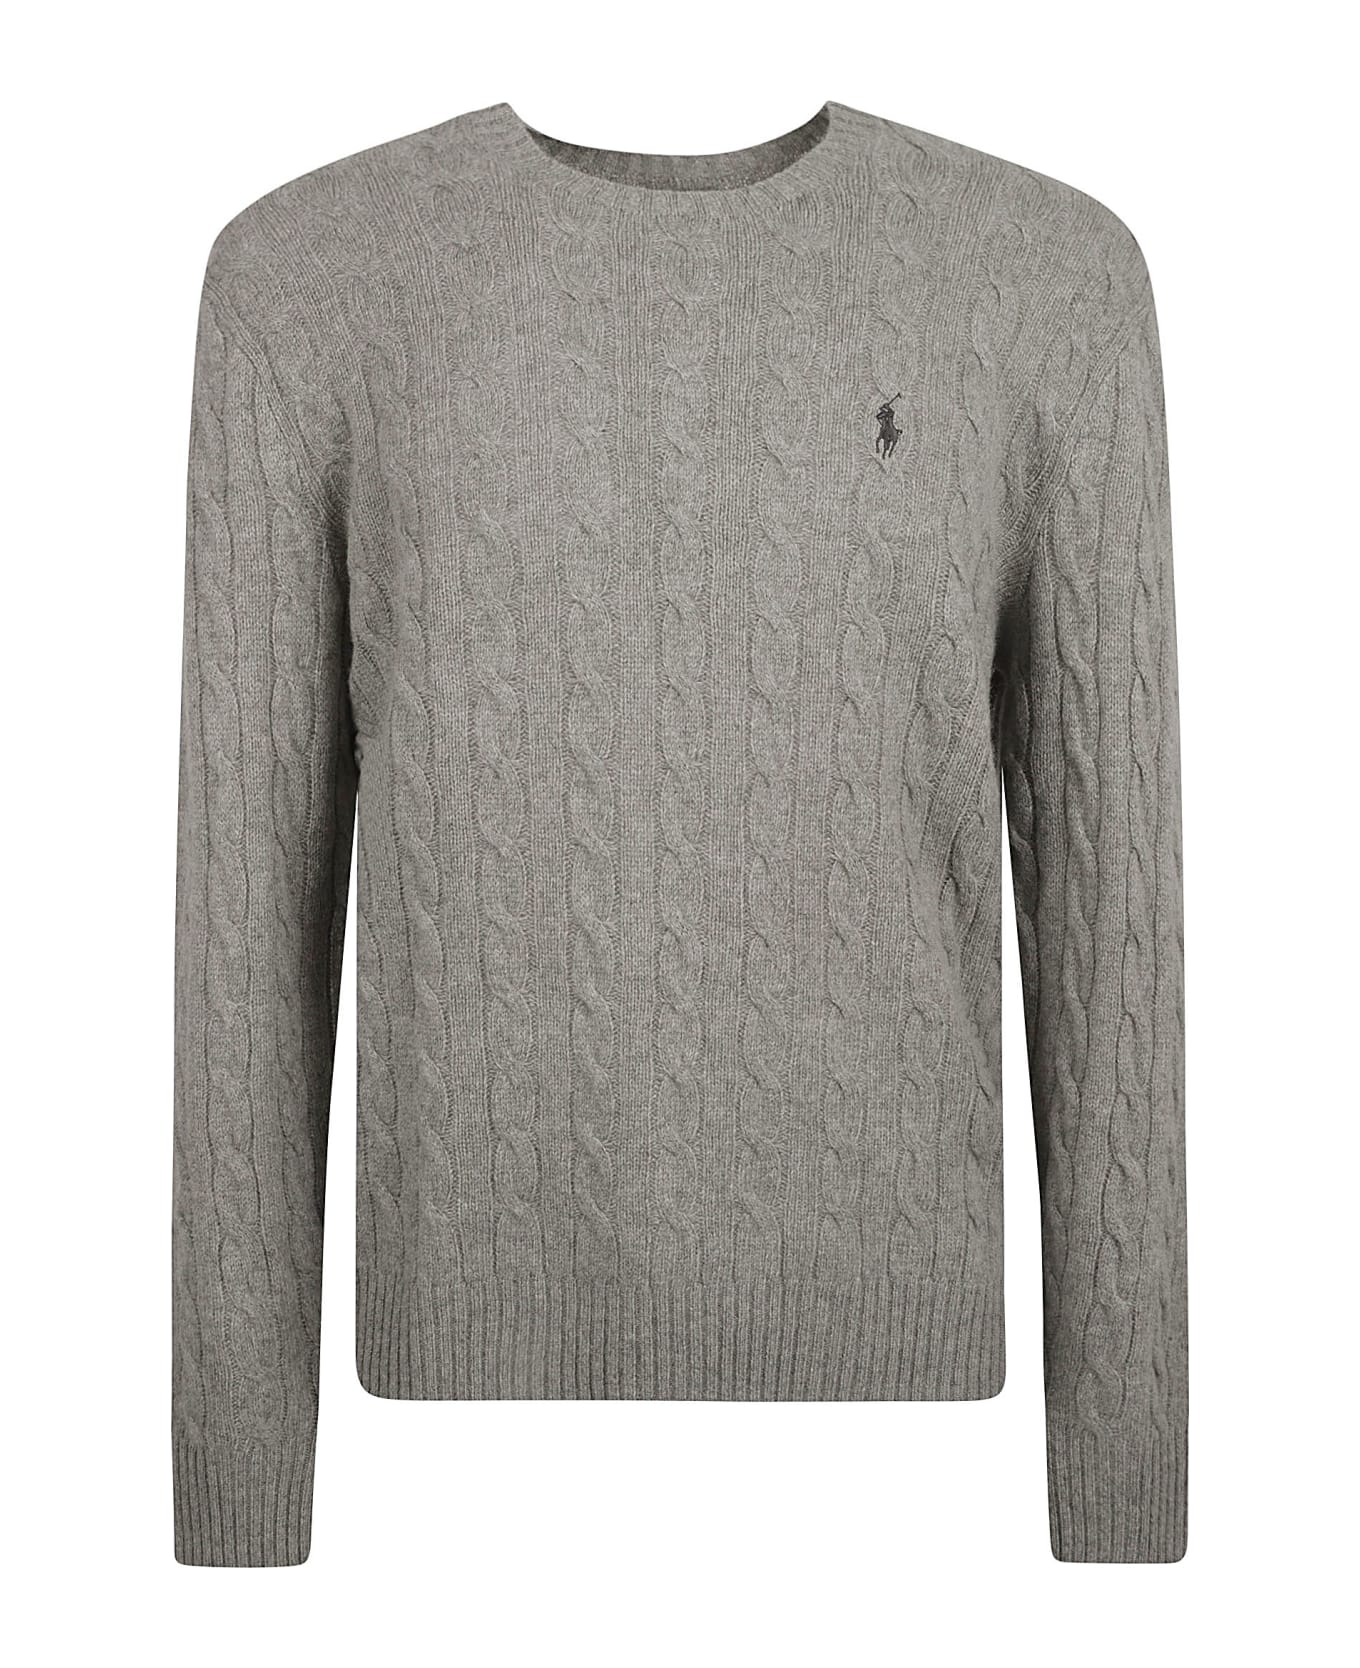 Polo Ralph Lauren Logo Embroidery Patterned Woven Sweater Polo Ralph Lauren - Grey